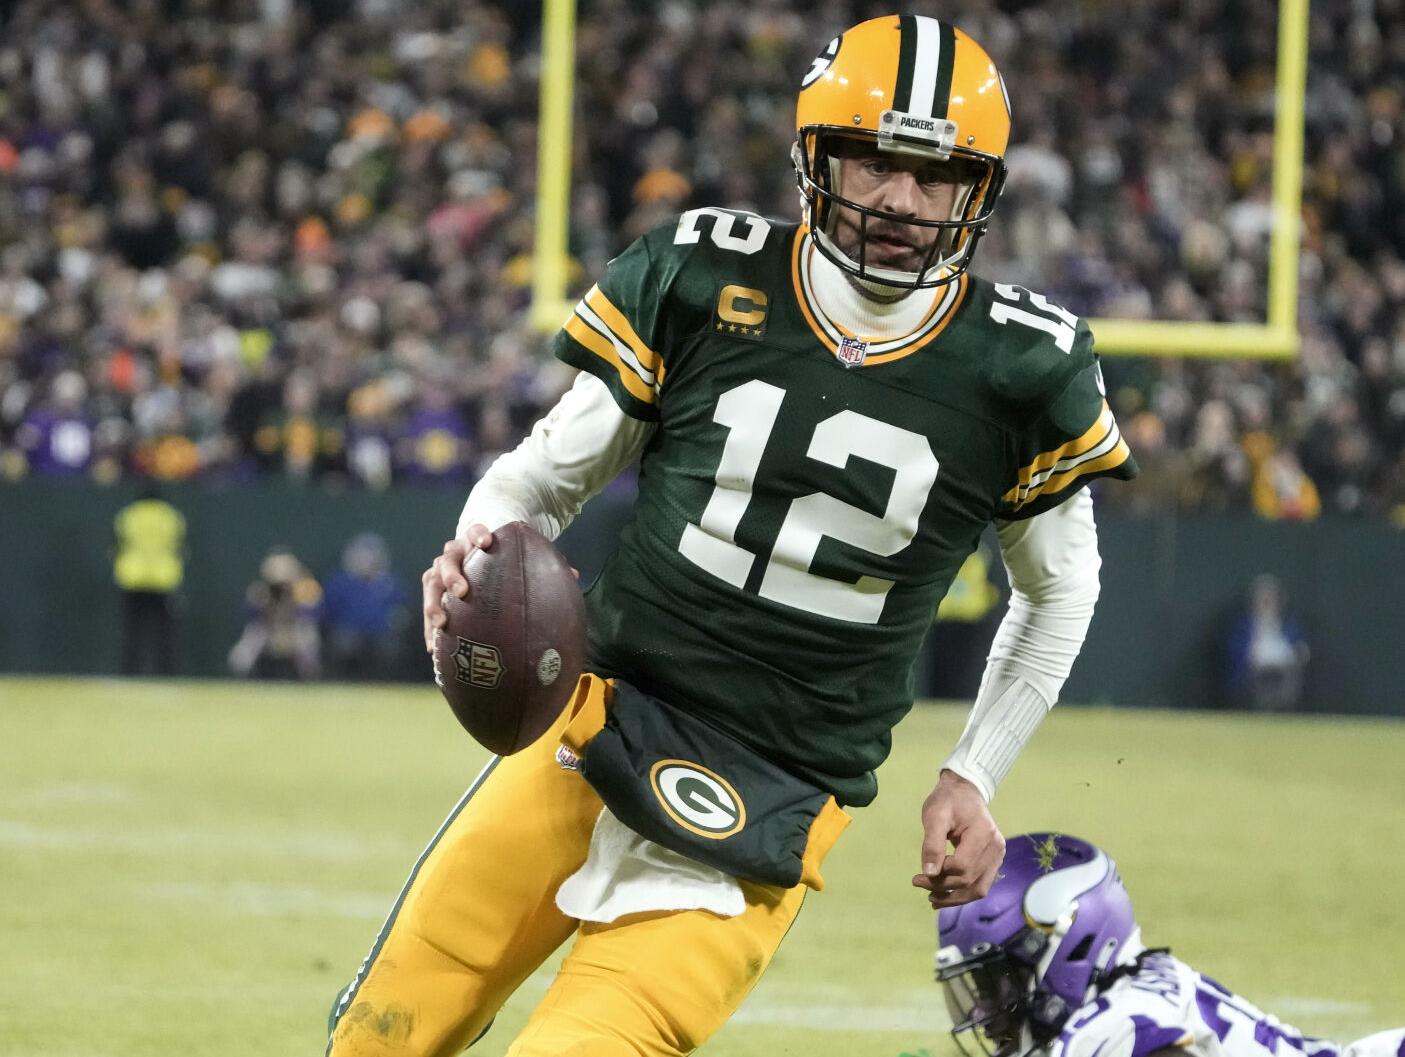 Aaron Rodgers rushes in for a 2-yard score vs the Minnesota Vikings in Week 17